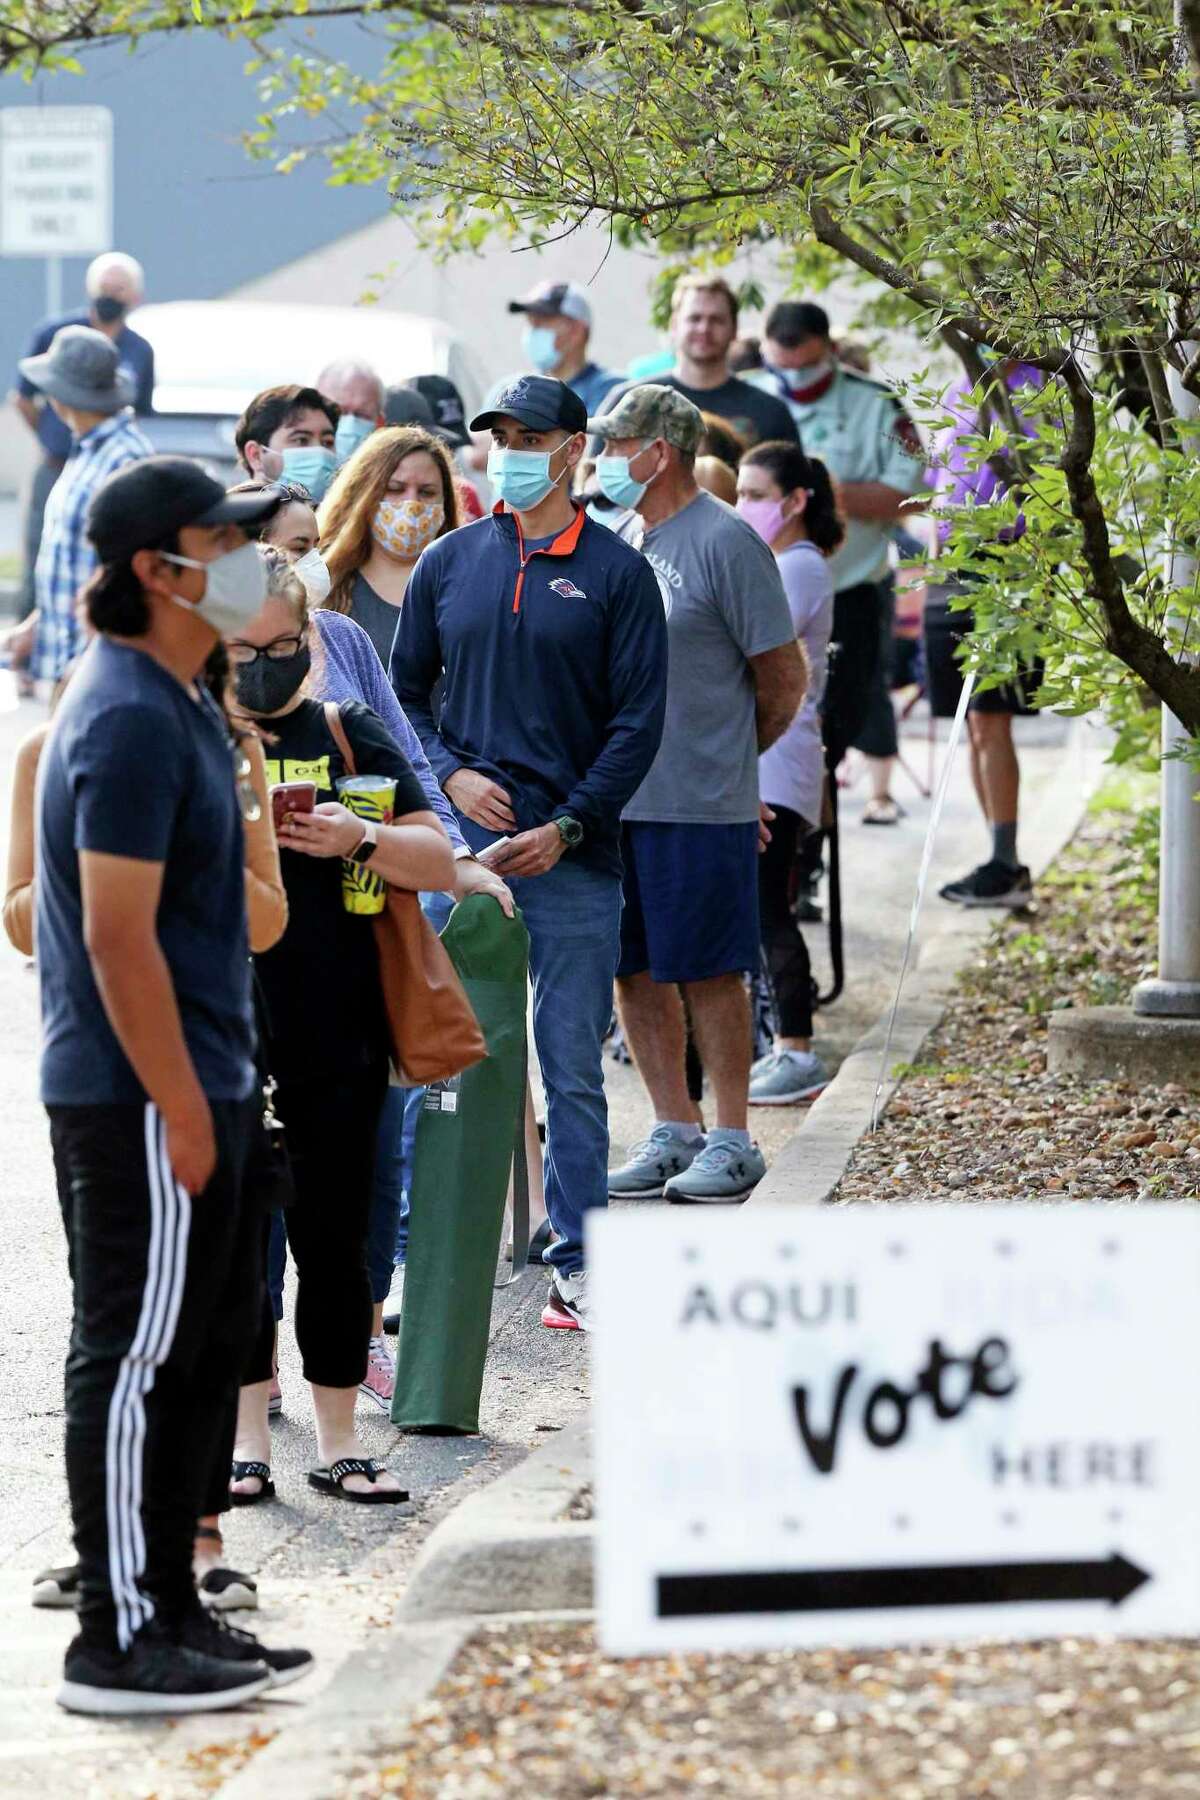 Voters wait in a long line at Brookhollow Library in October. After a secure election that saw record turnout, Republicans across the nation, including in Texas, are pushing efforts to limit ballot access.